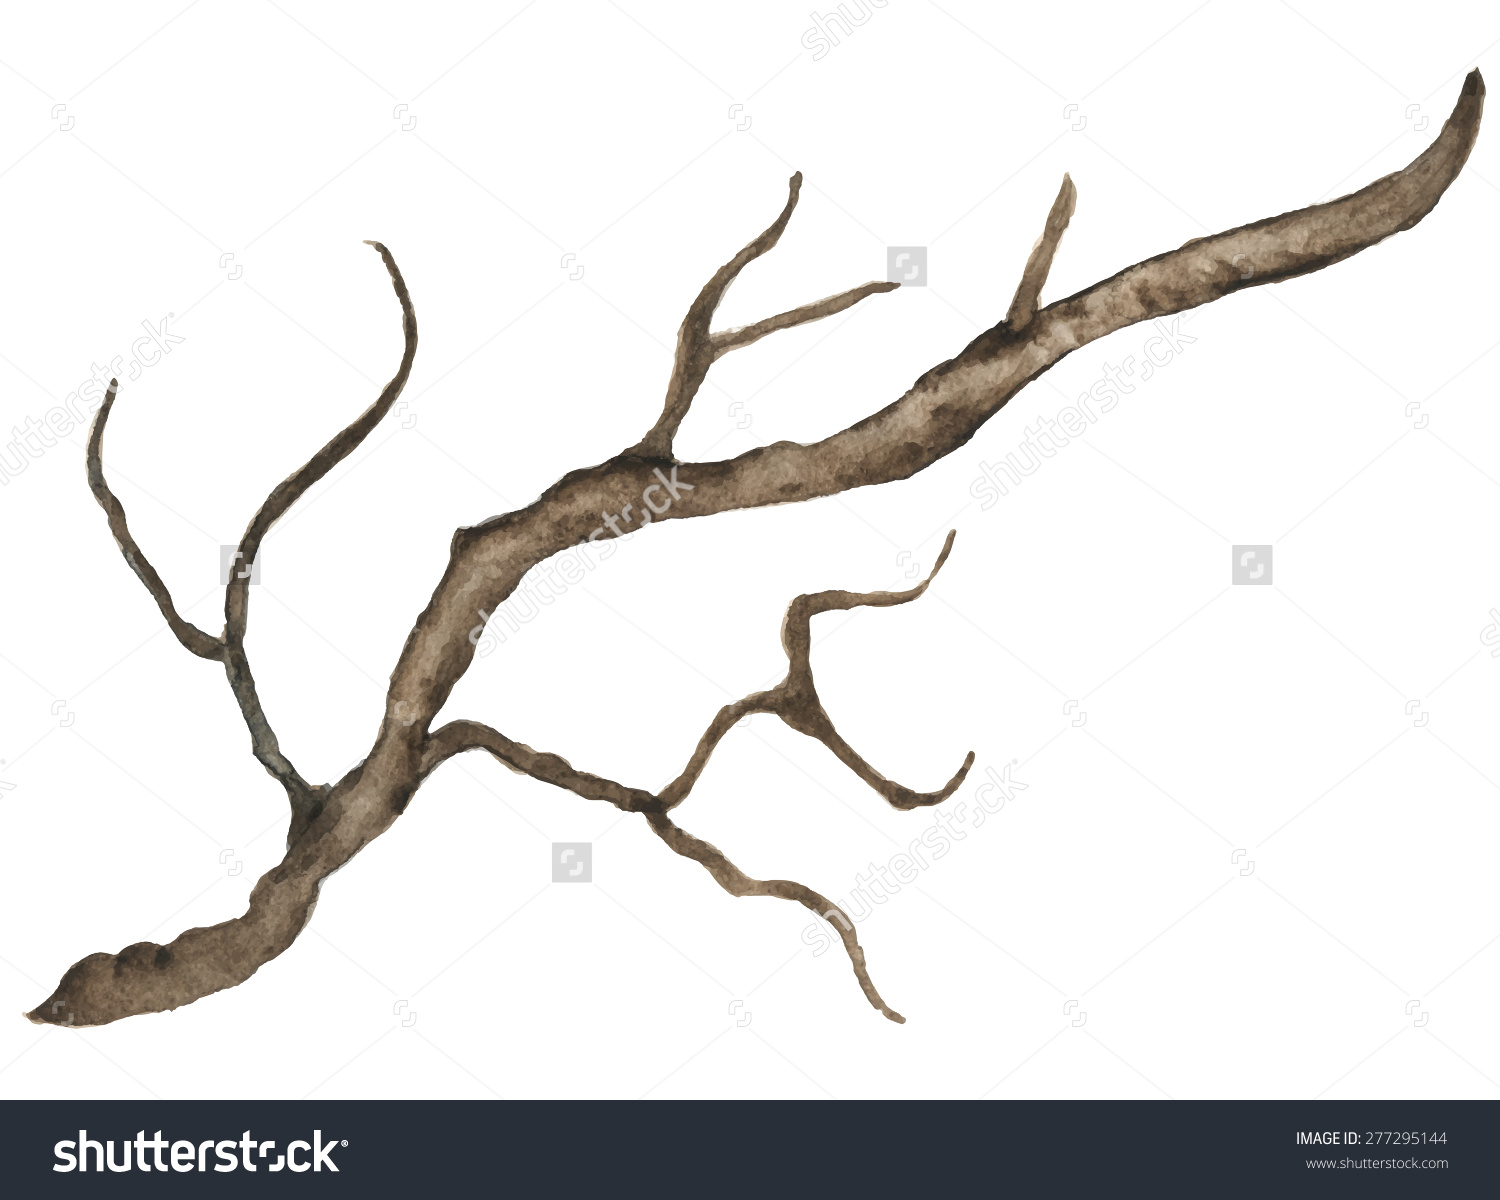 Watercolor Bare Tree Snag Bough Driftwood Stock Vector 277295144.